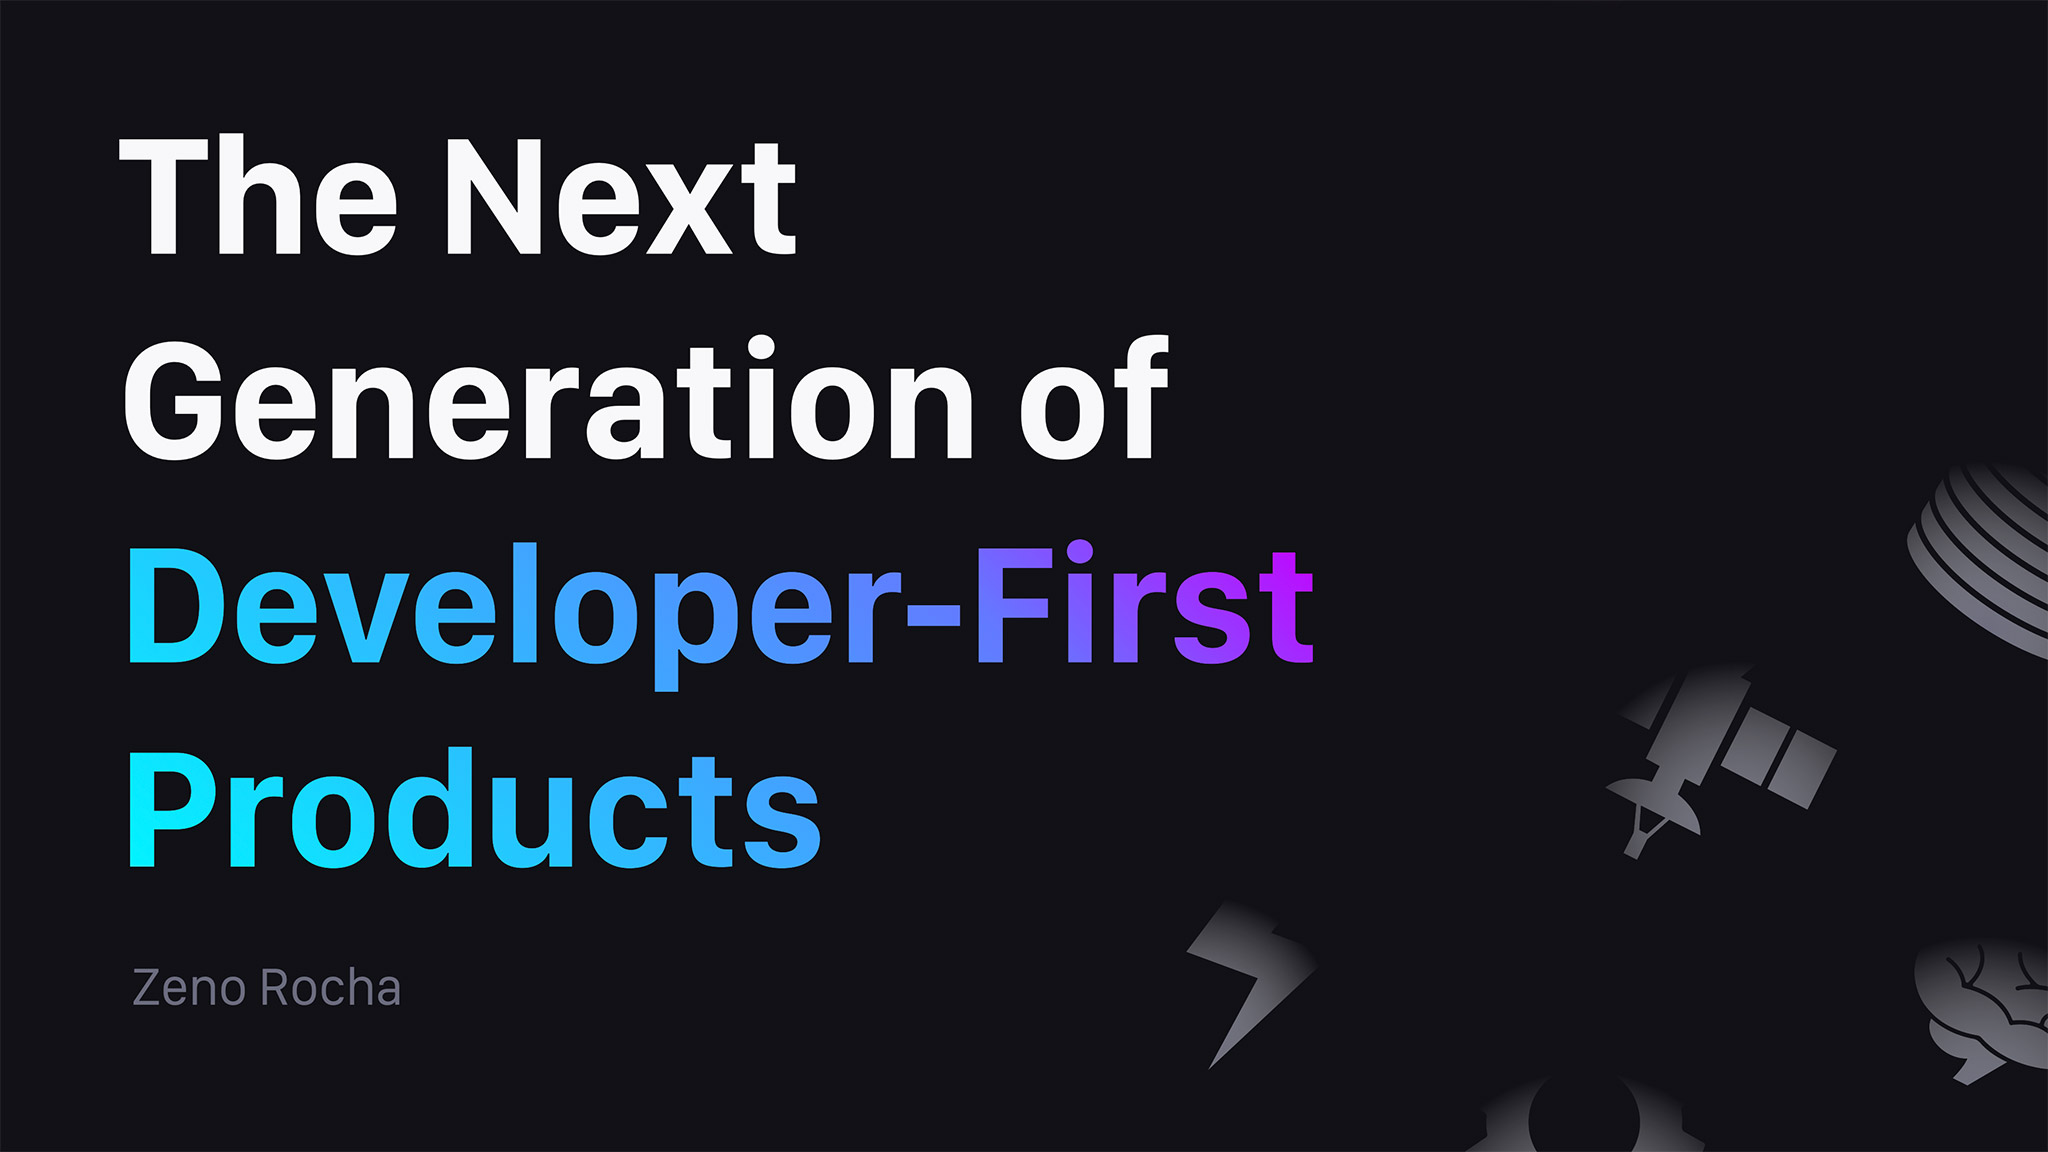 The next generation of developer-first products